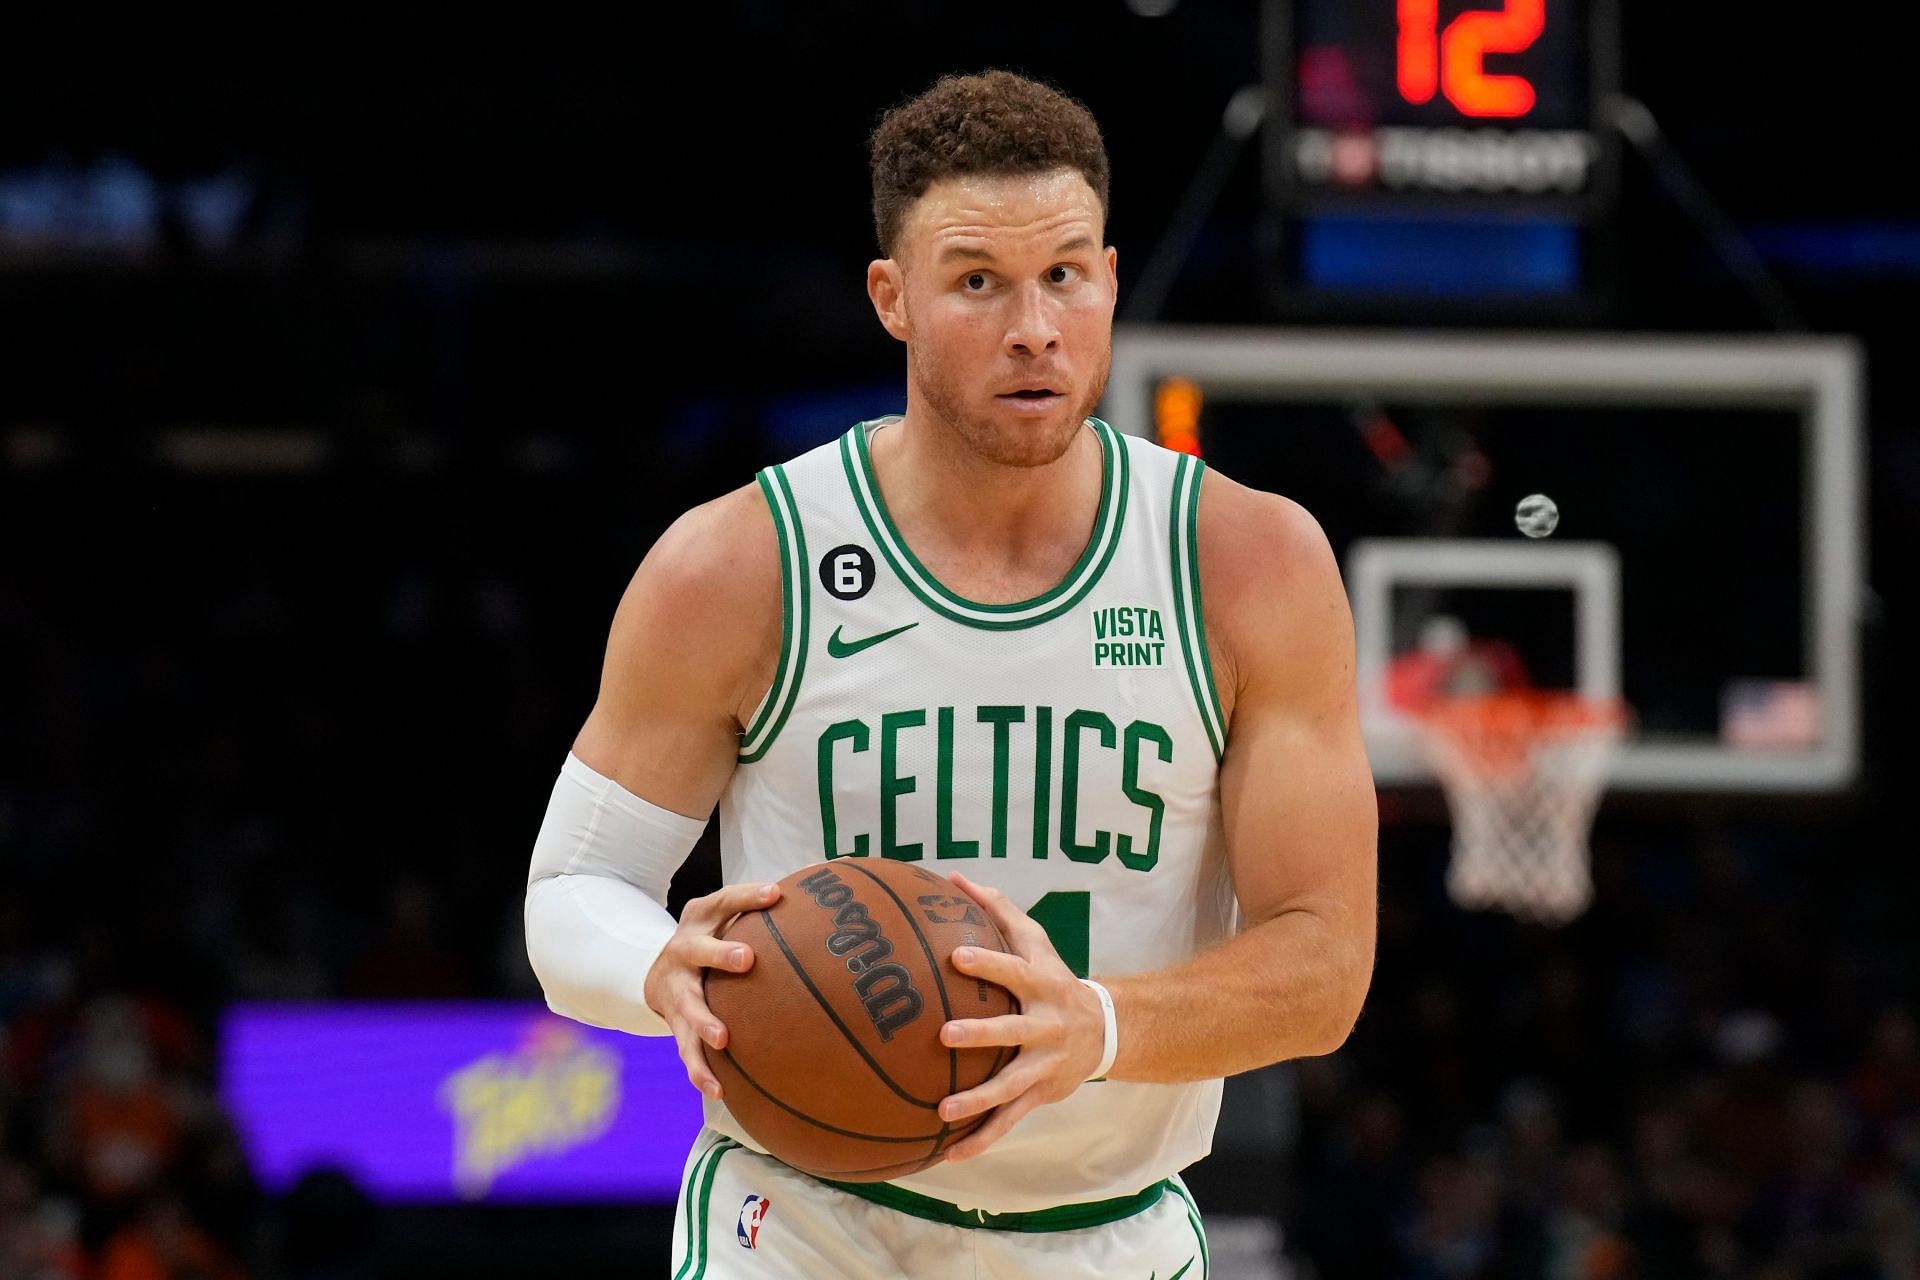 Fans react to Blake Griffin drawing interest from the Warriors